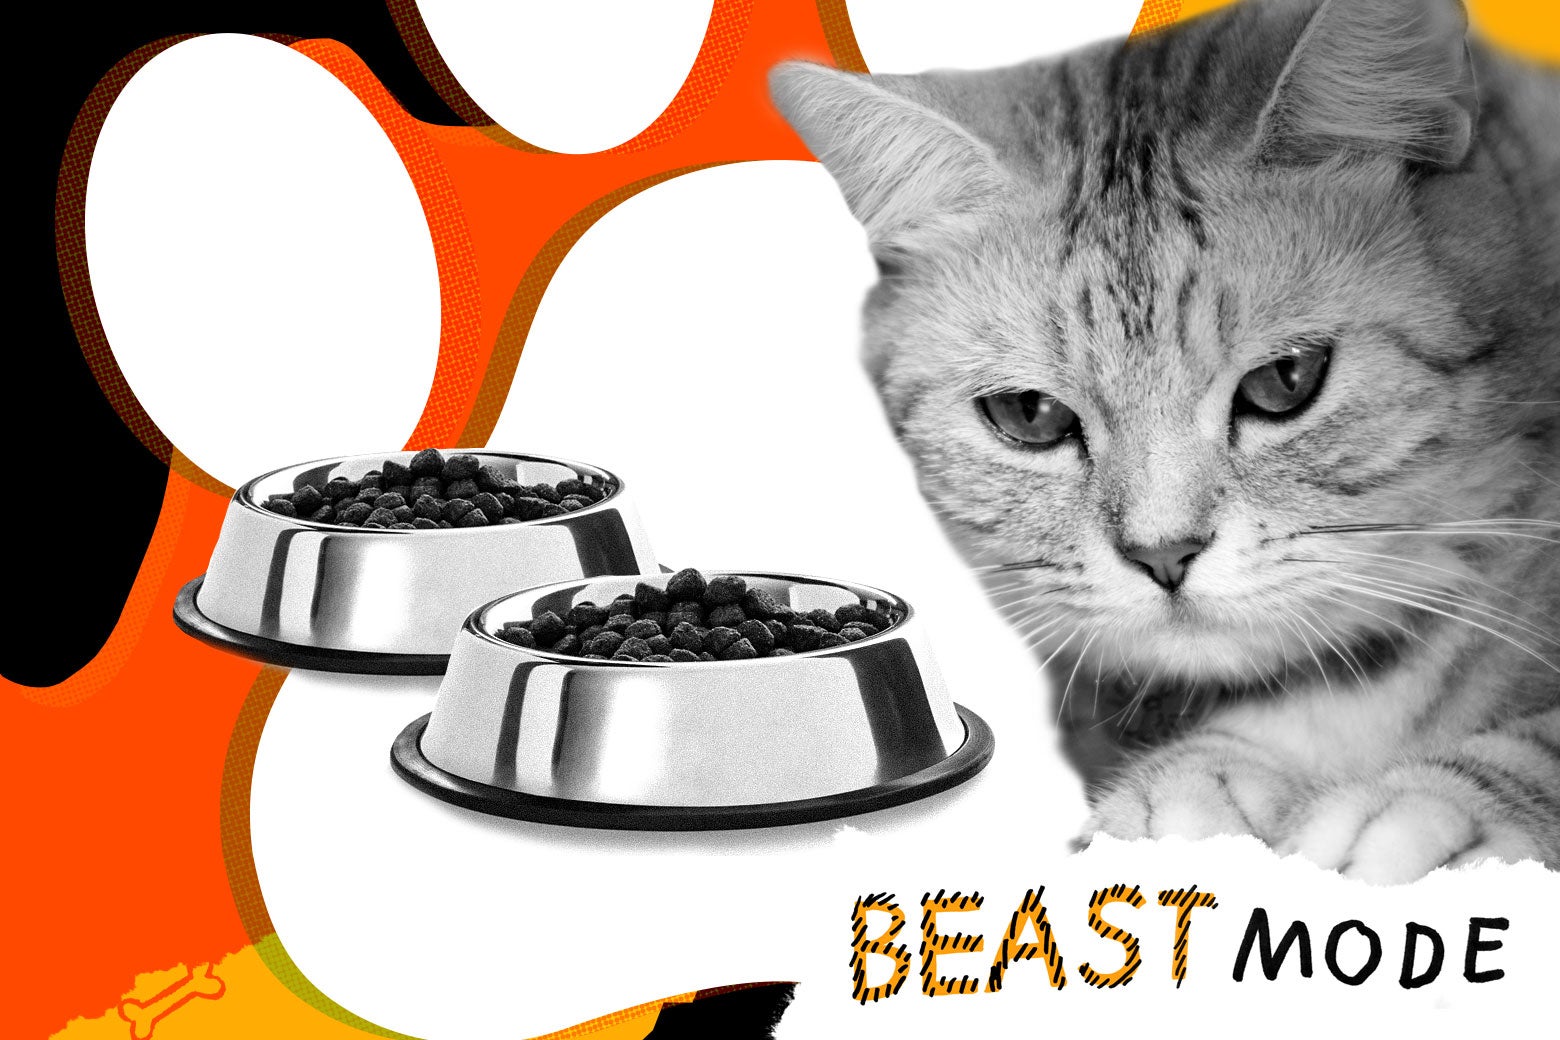 Photo illustration of a stoic-looking cat sitting in front of two pet bowls filled with cat food.